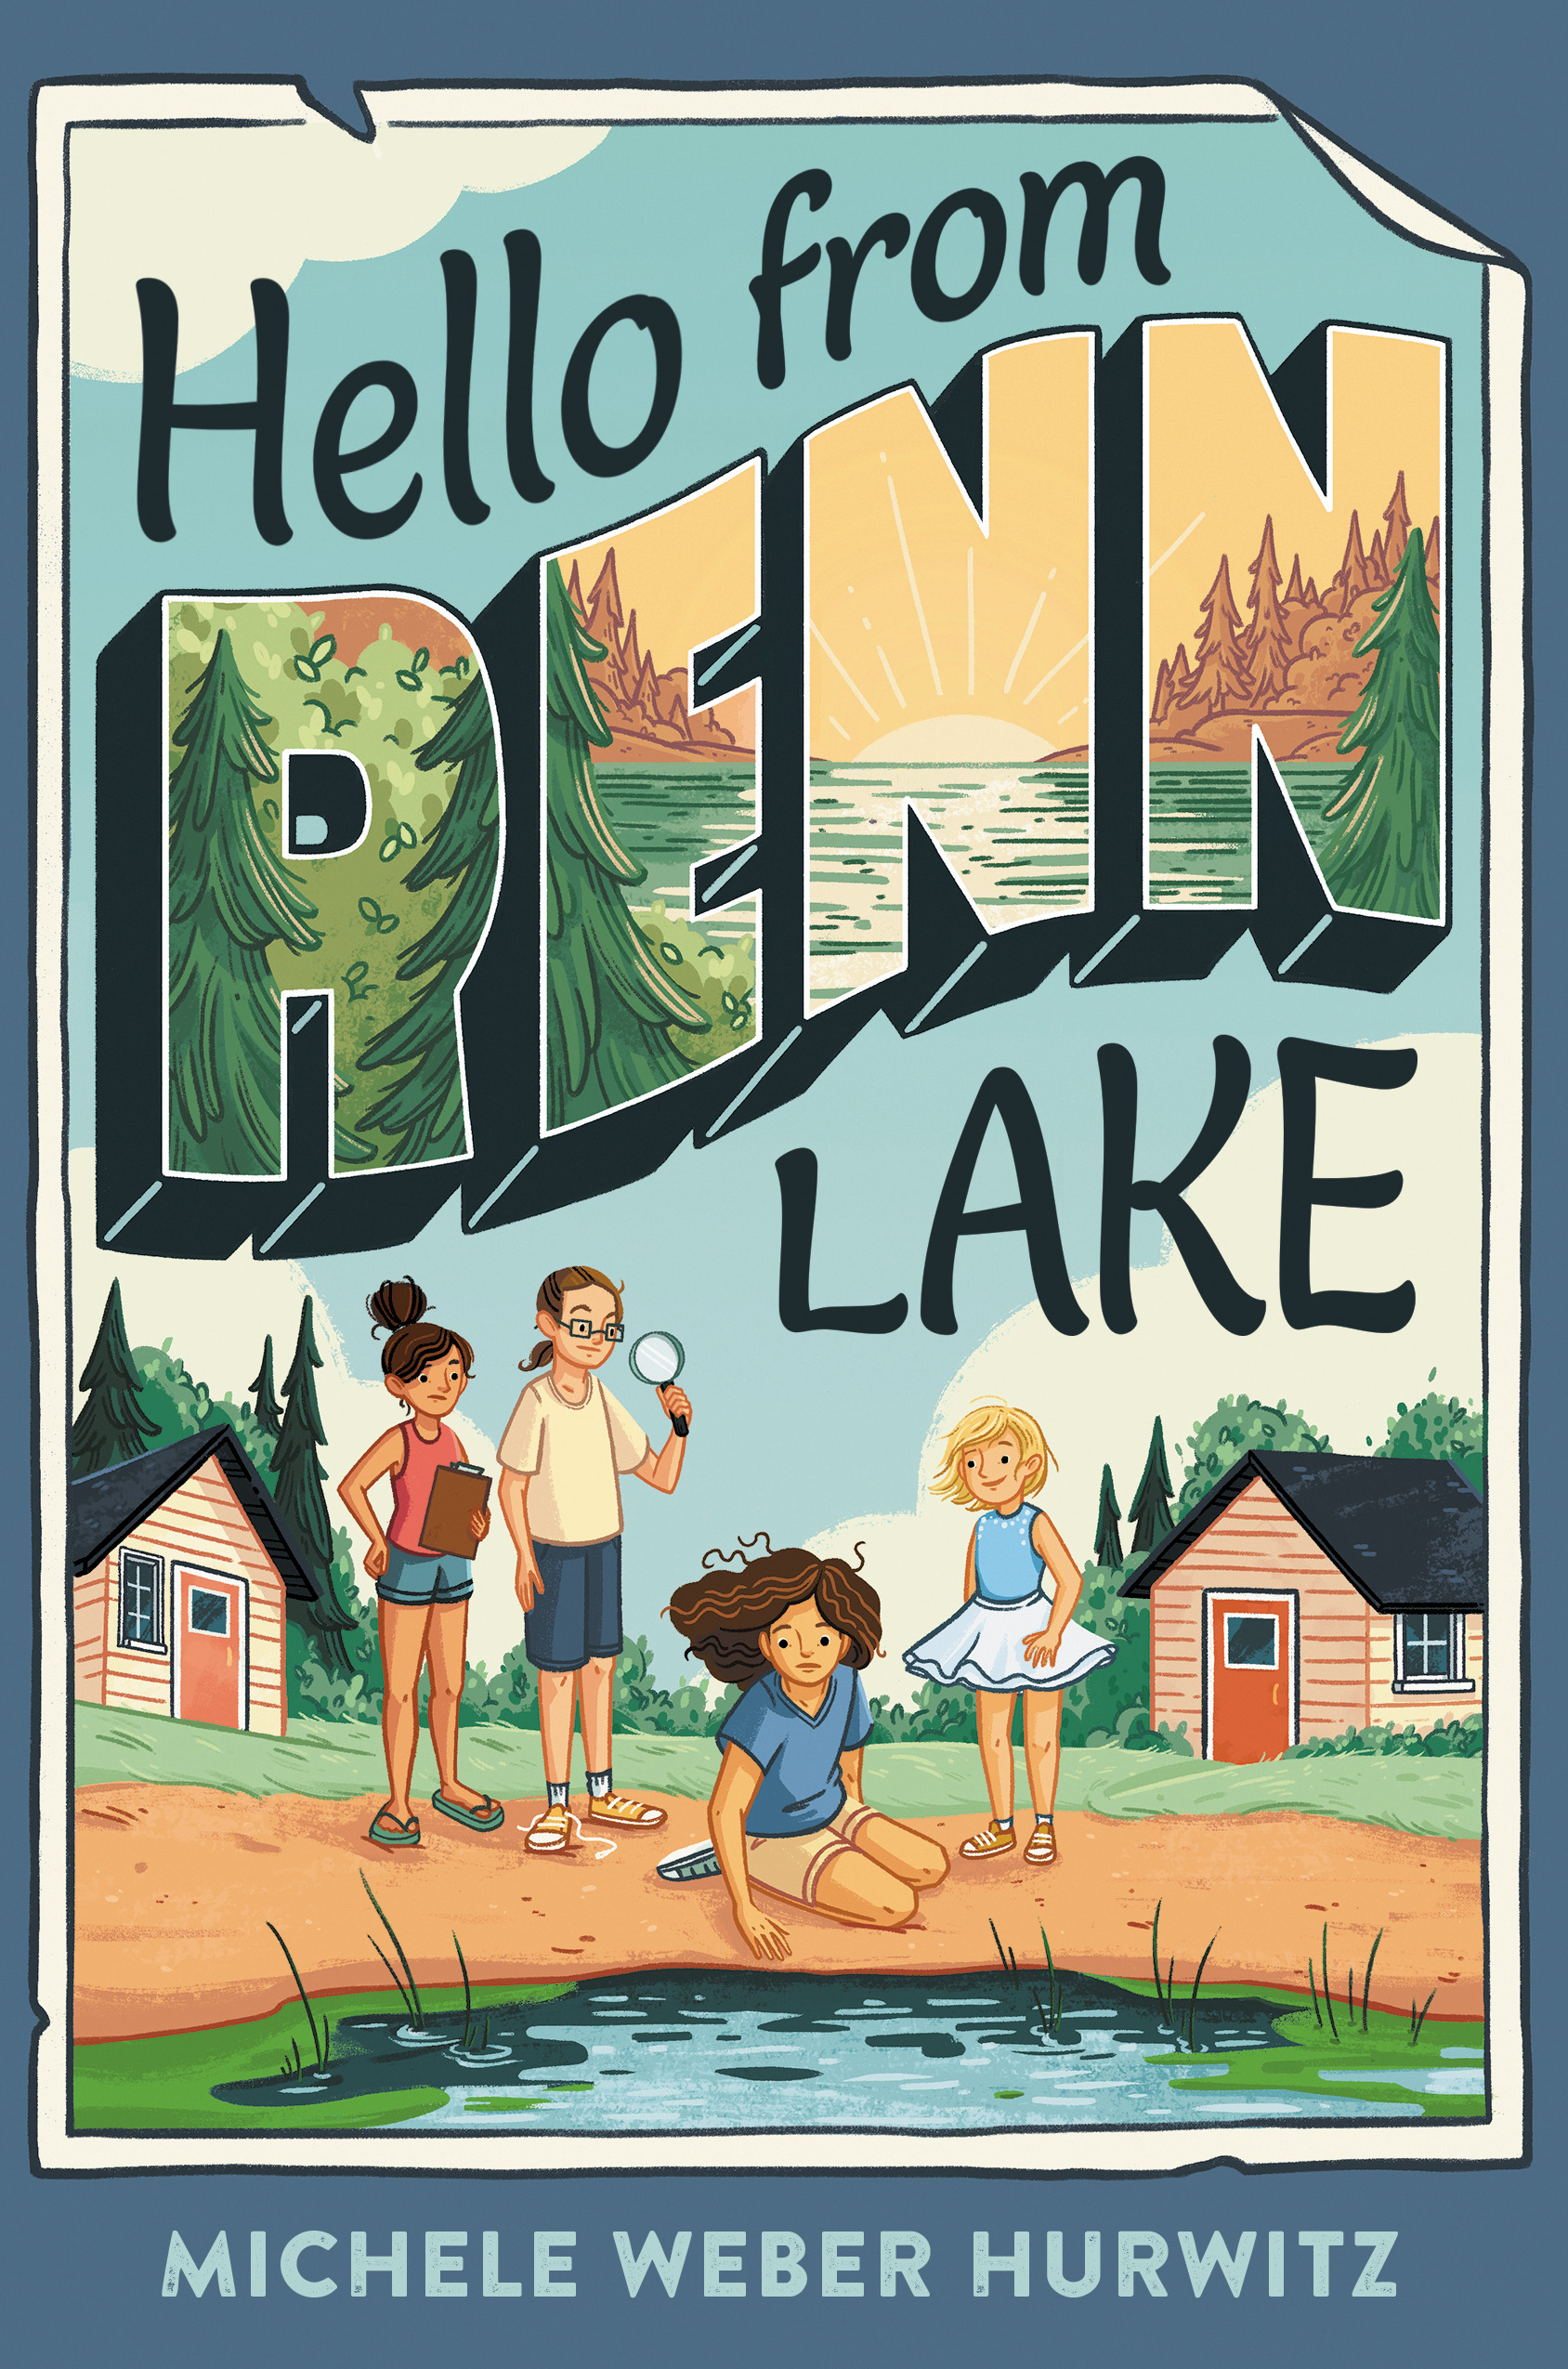 Hello from Renn Lake | 9-12 years old